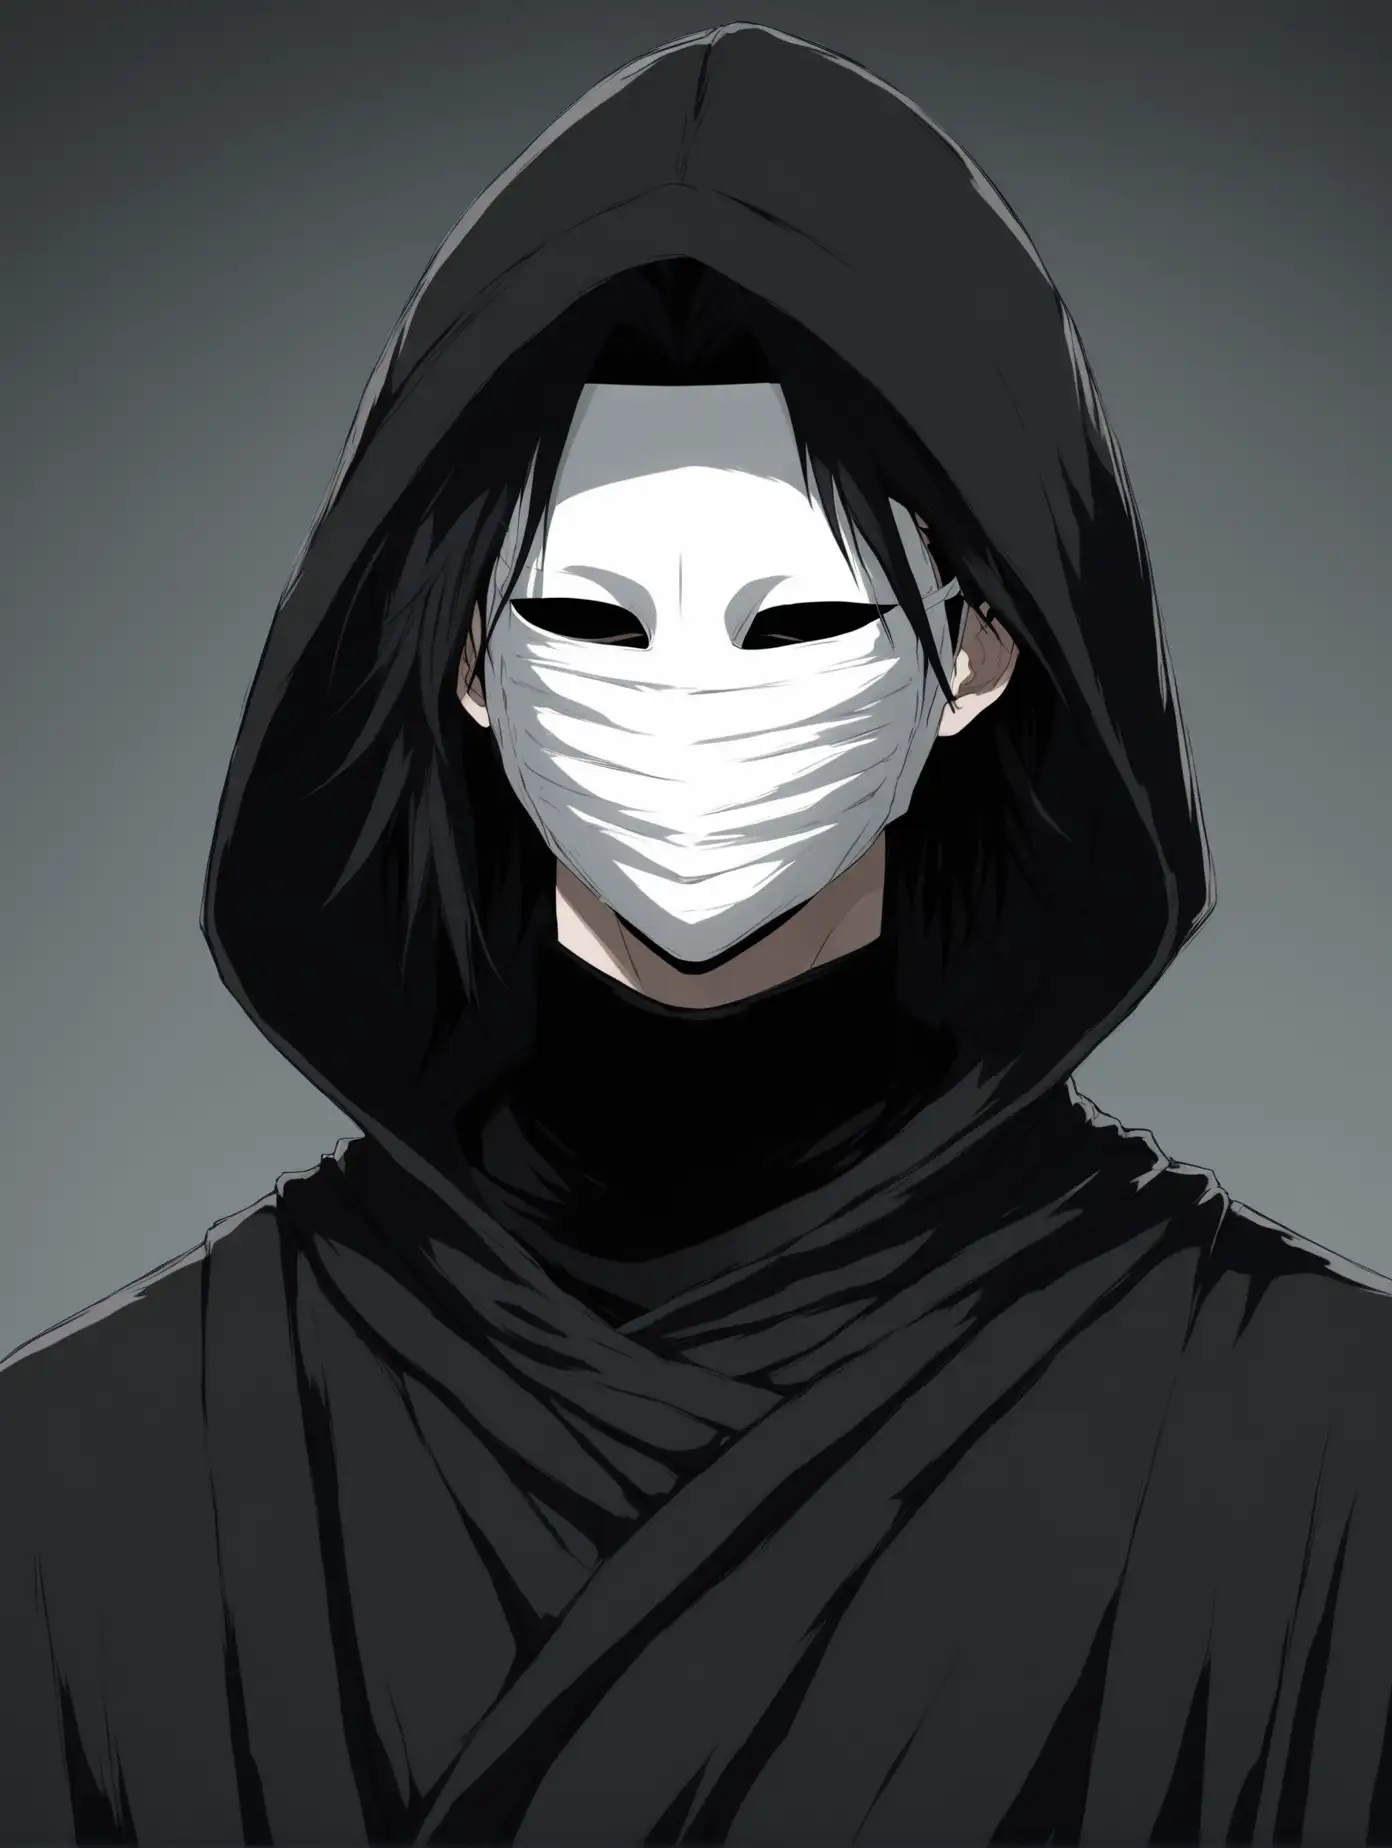 Mysterious-Anime-Character-in-Black-Robe-with-Mask